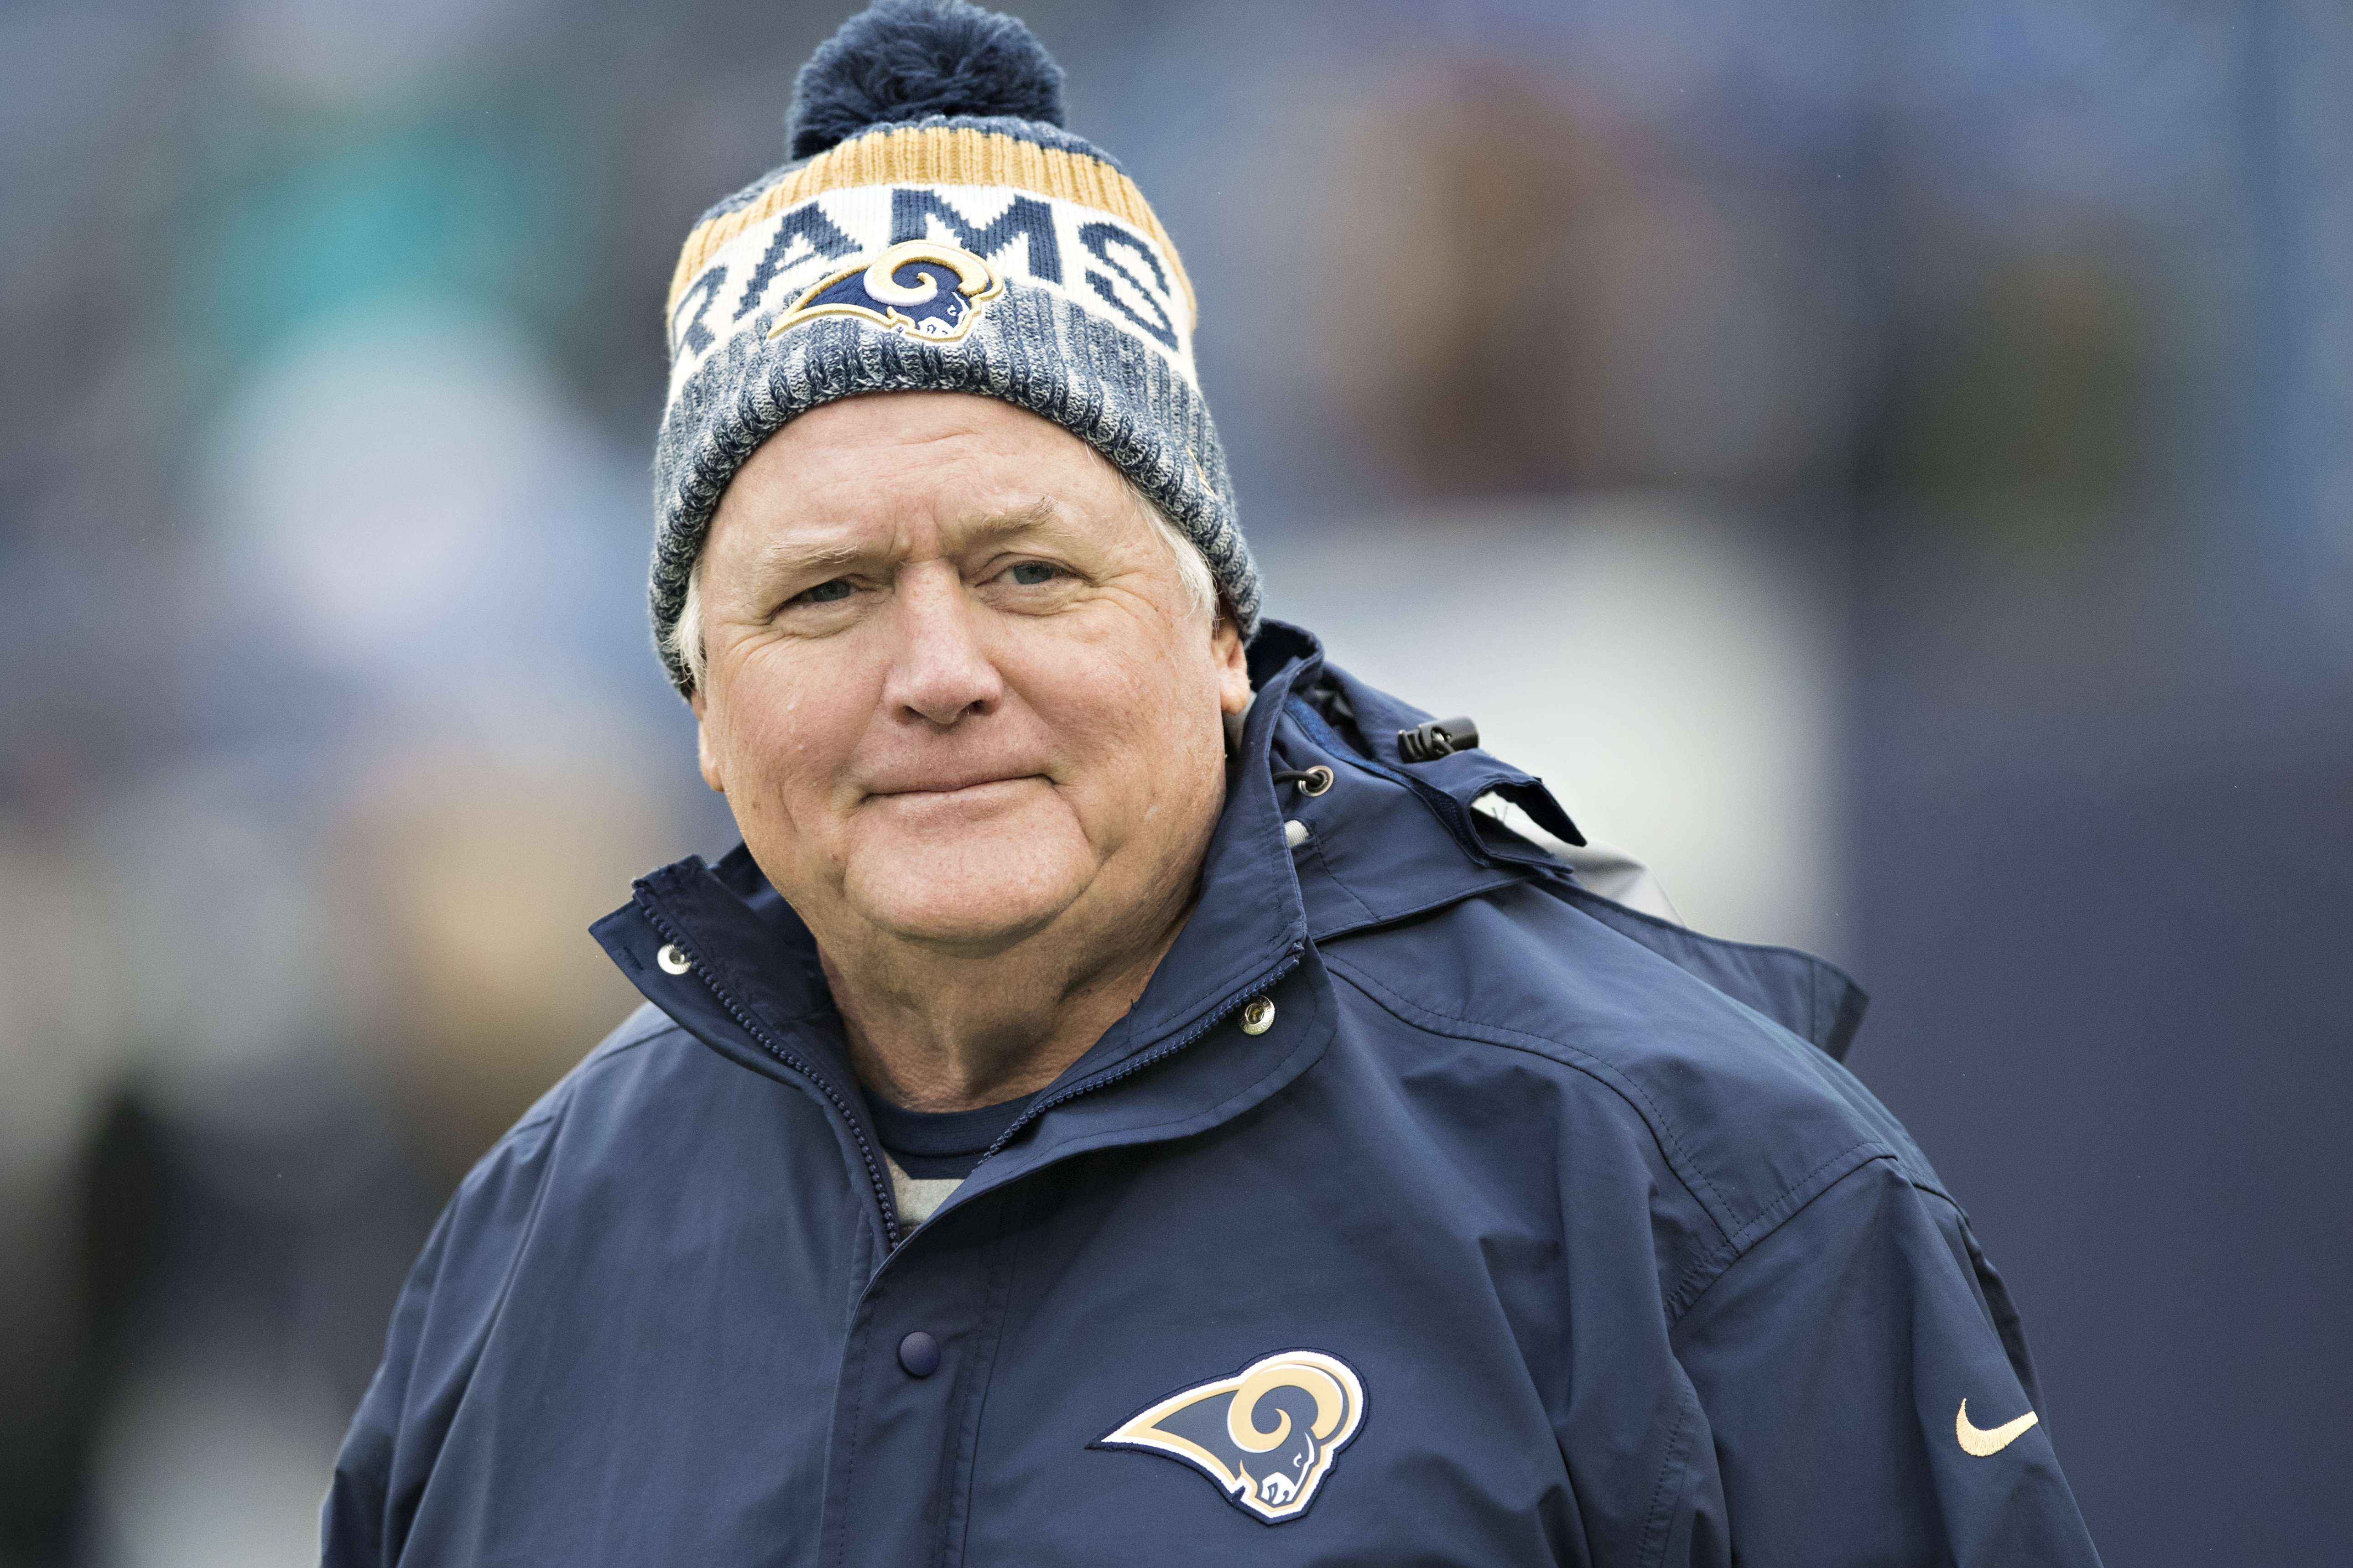 Defensive Coordinator Wade Phillips of the Los Angeles Rams walks onto the field before a game against the Tennessee Titans at Nissan Stadium on December 24, 2017 in Nashville, Tennessee. The Rams defeated the Titans 27-23.